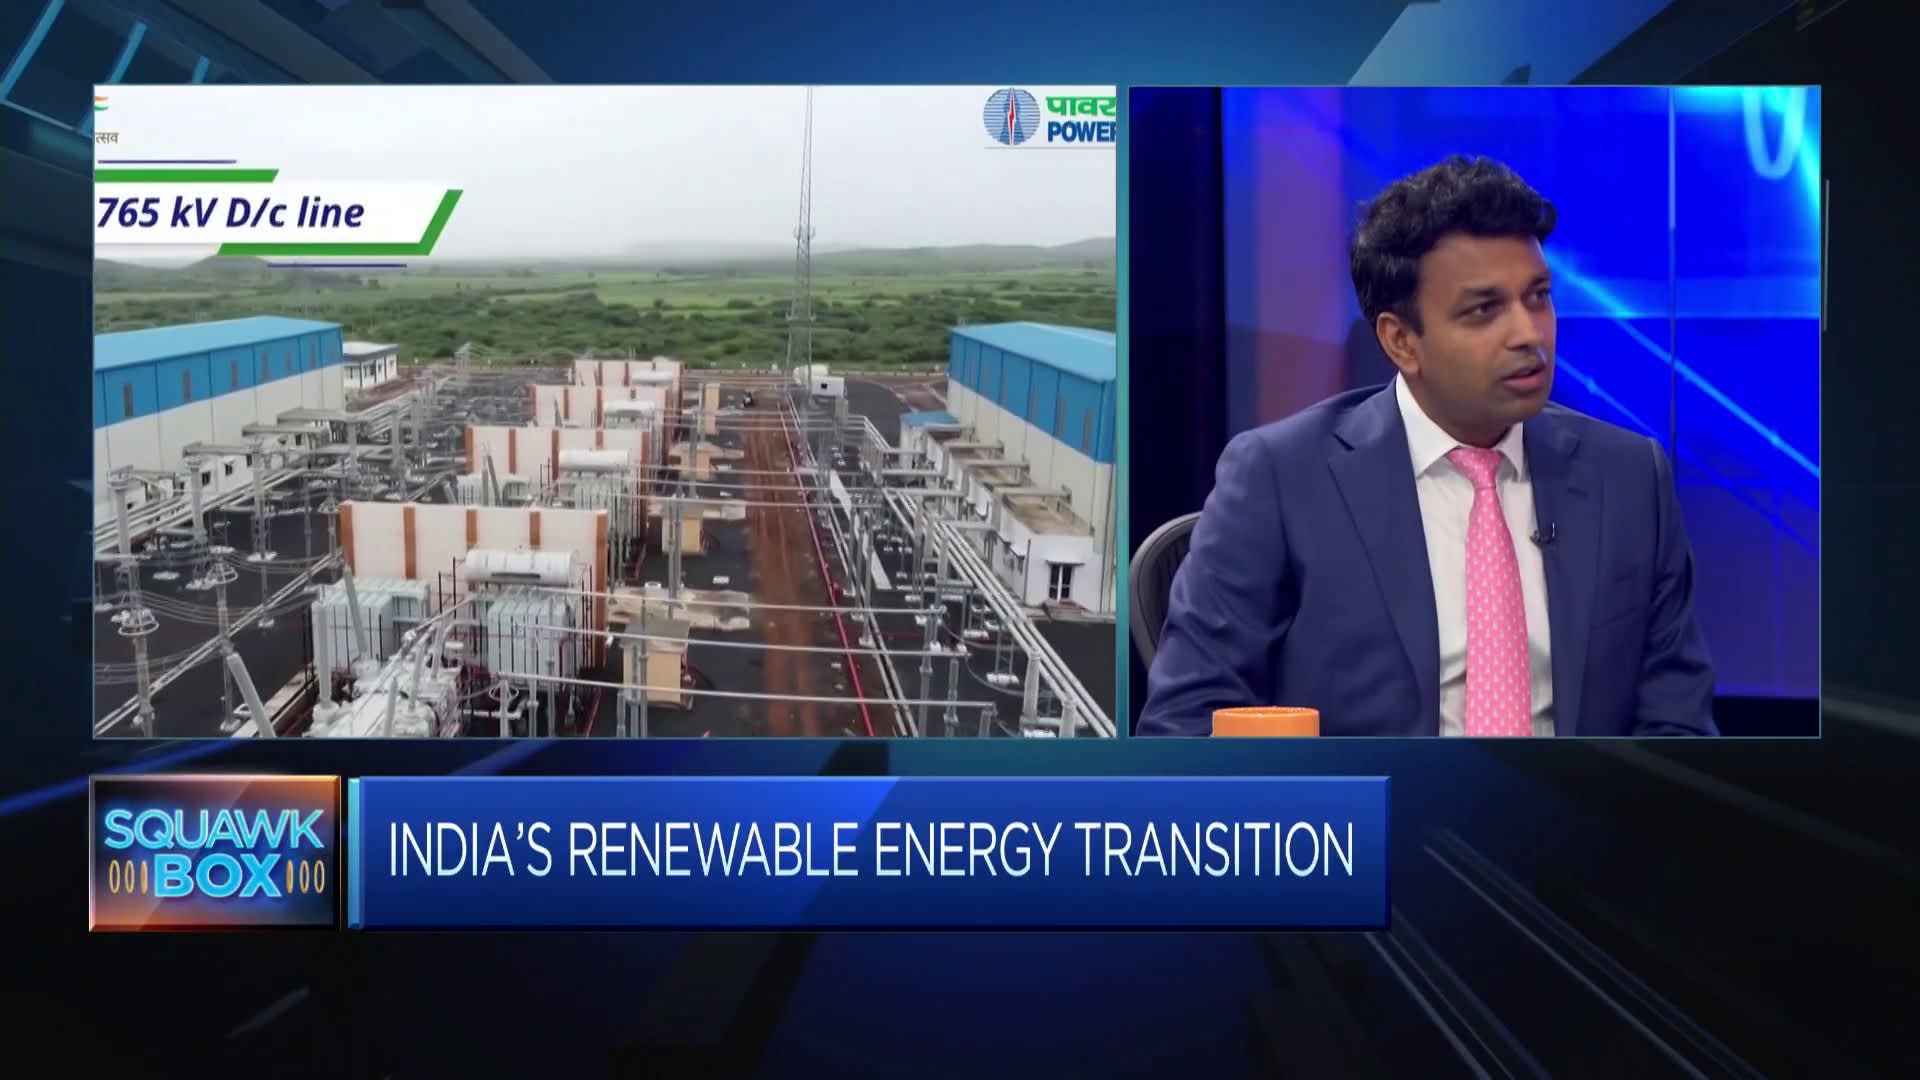 Goldman Sachs says India’s renewable capacity growth likely to double [Video]